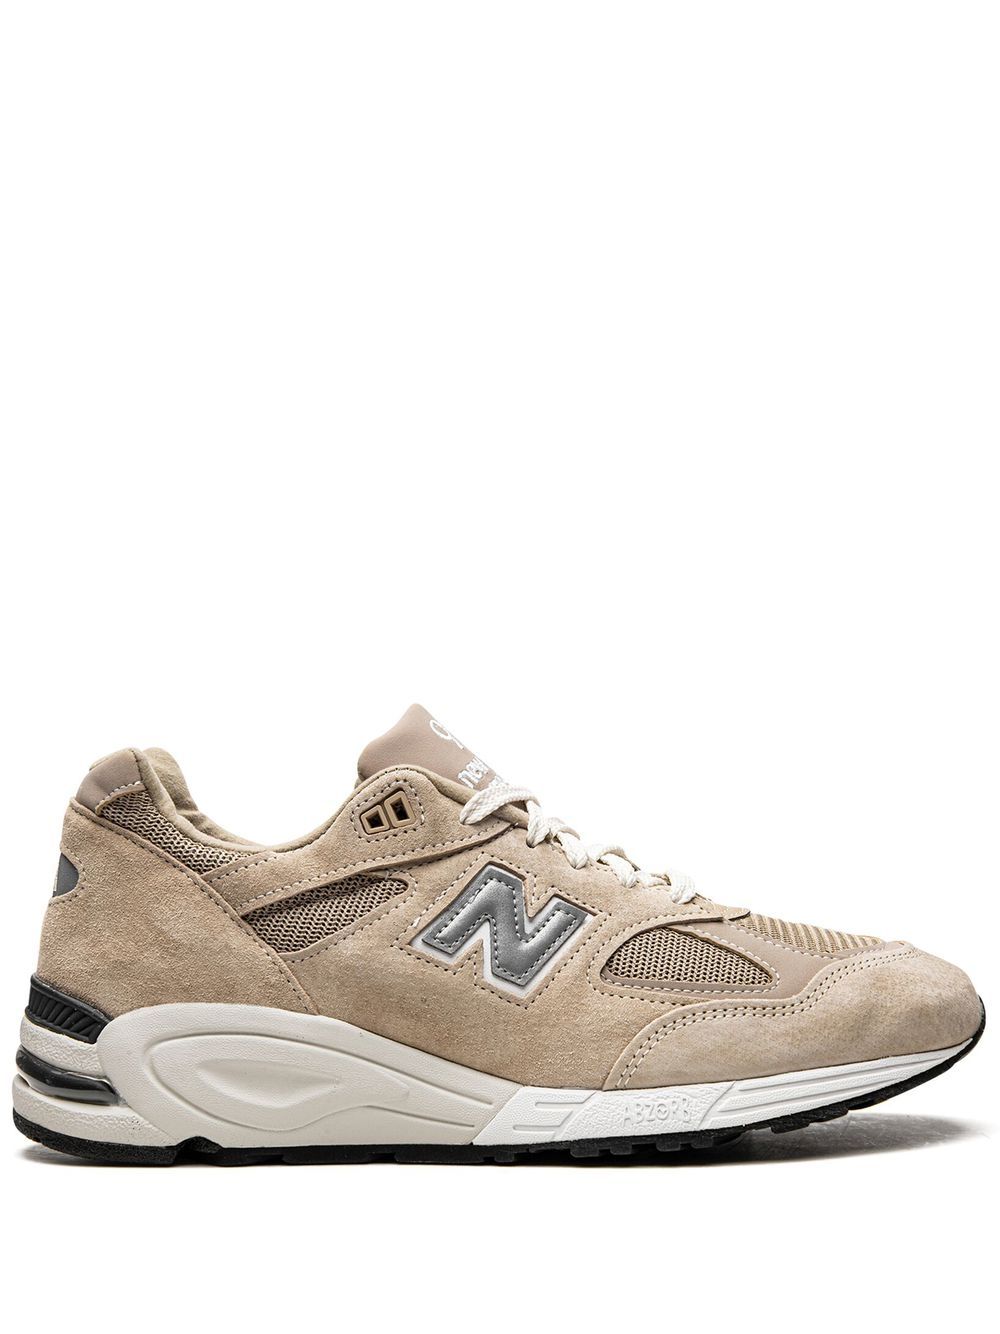 New Balance x Kith 990v2 low-top sneakers - Neutrals von New Balance